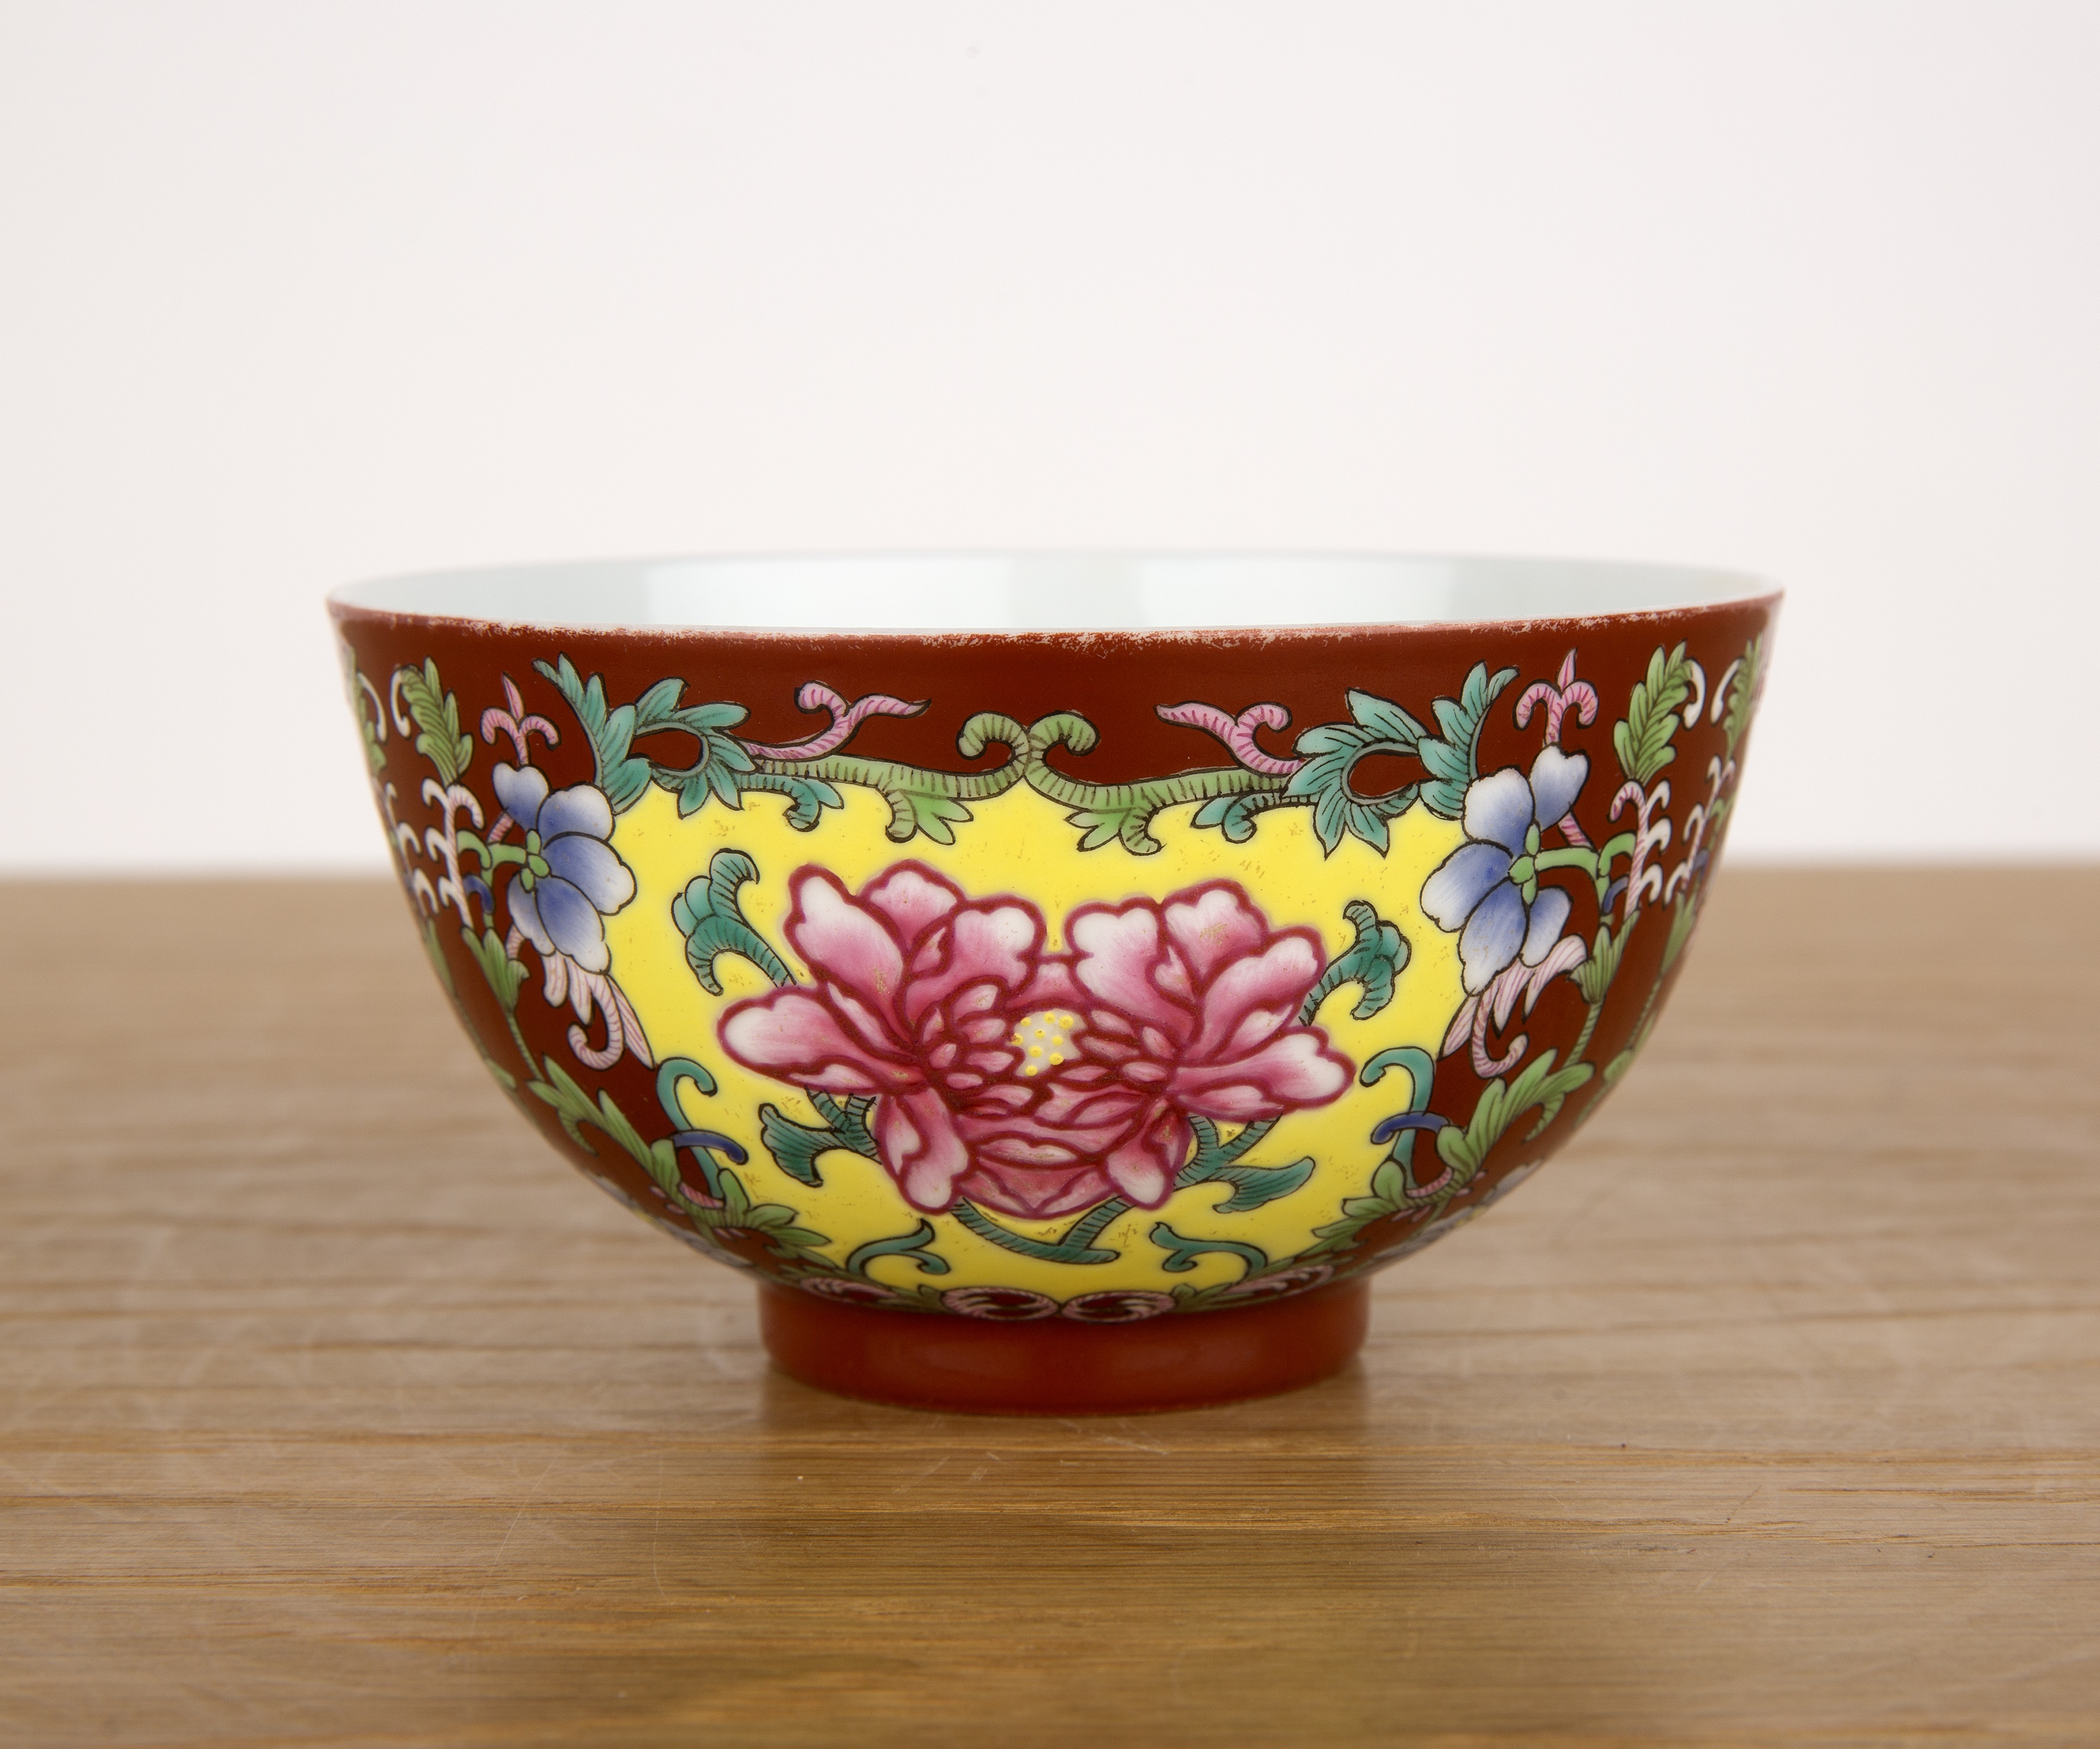 Polychrome enamelled porcelain bowl Chinese, 19th/20th Century painted with peonies and trailing